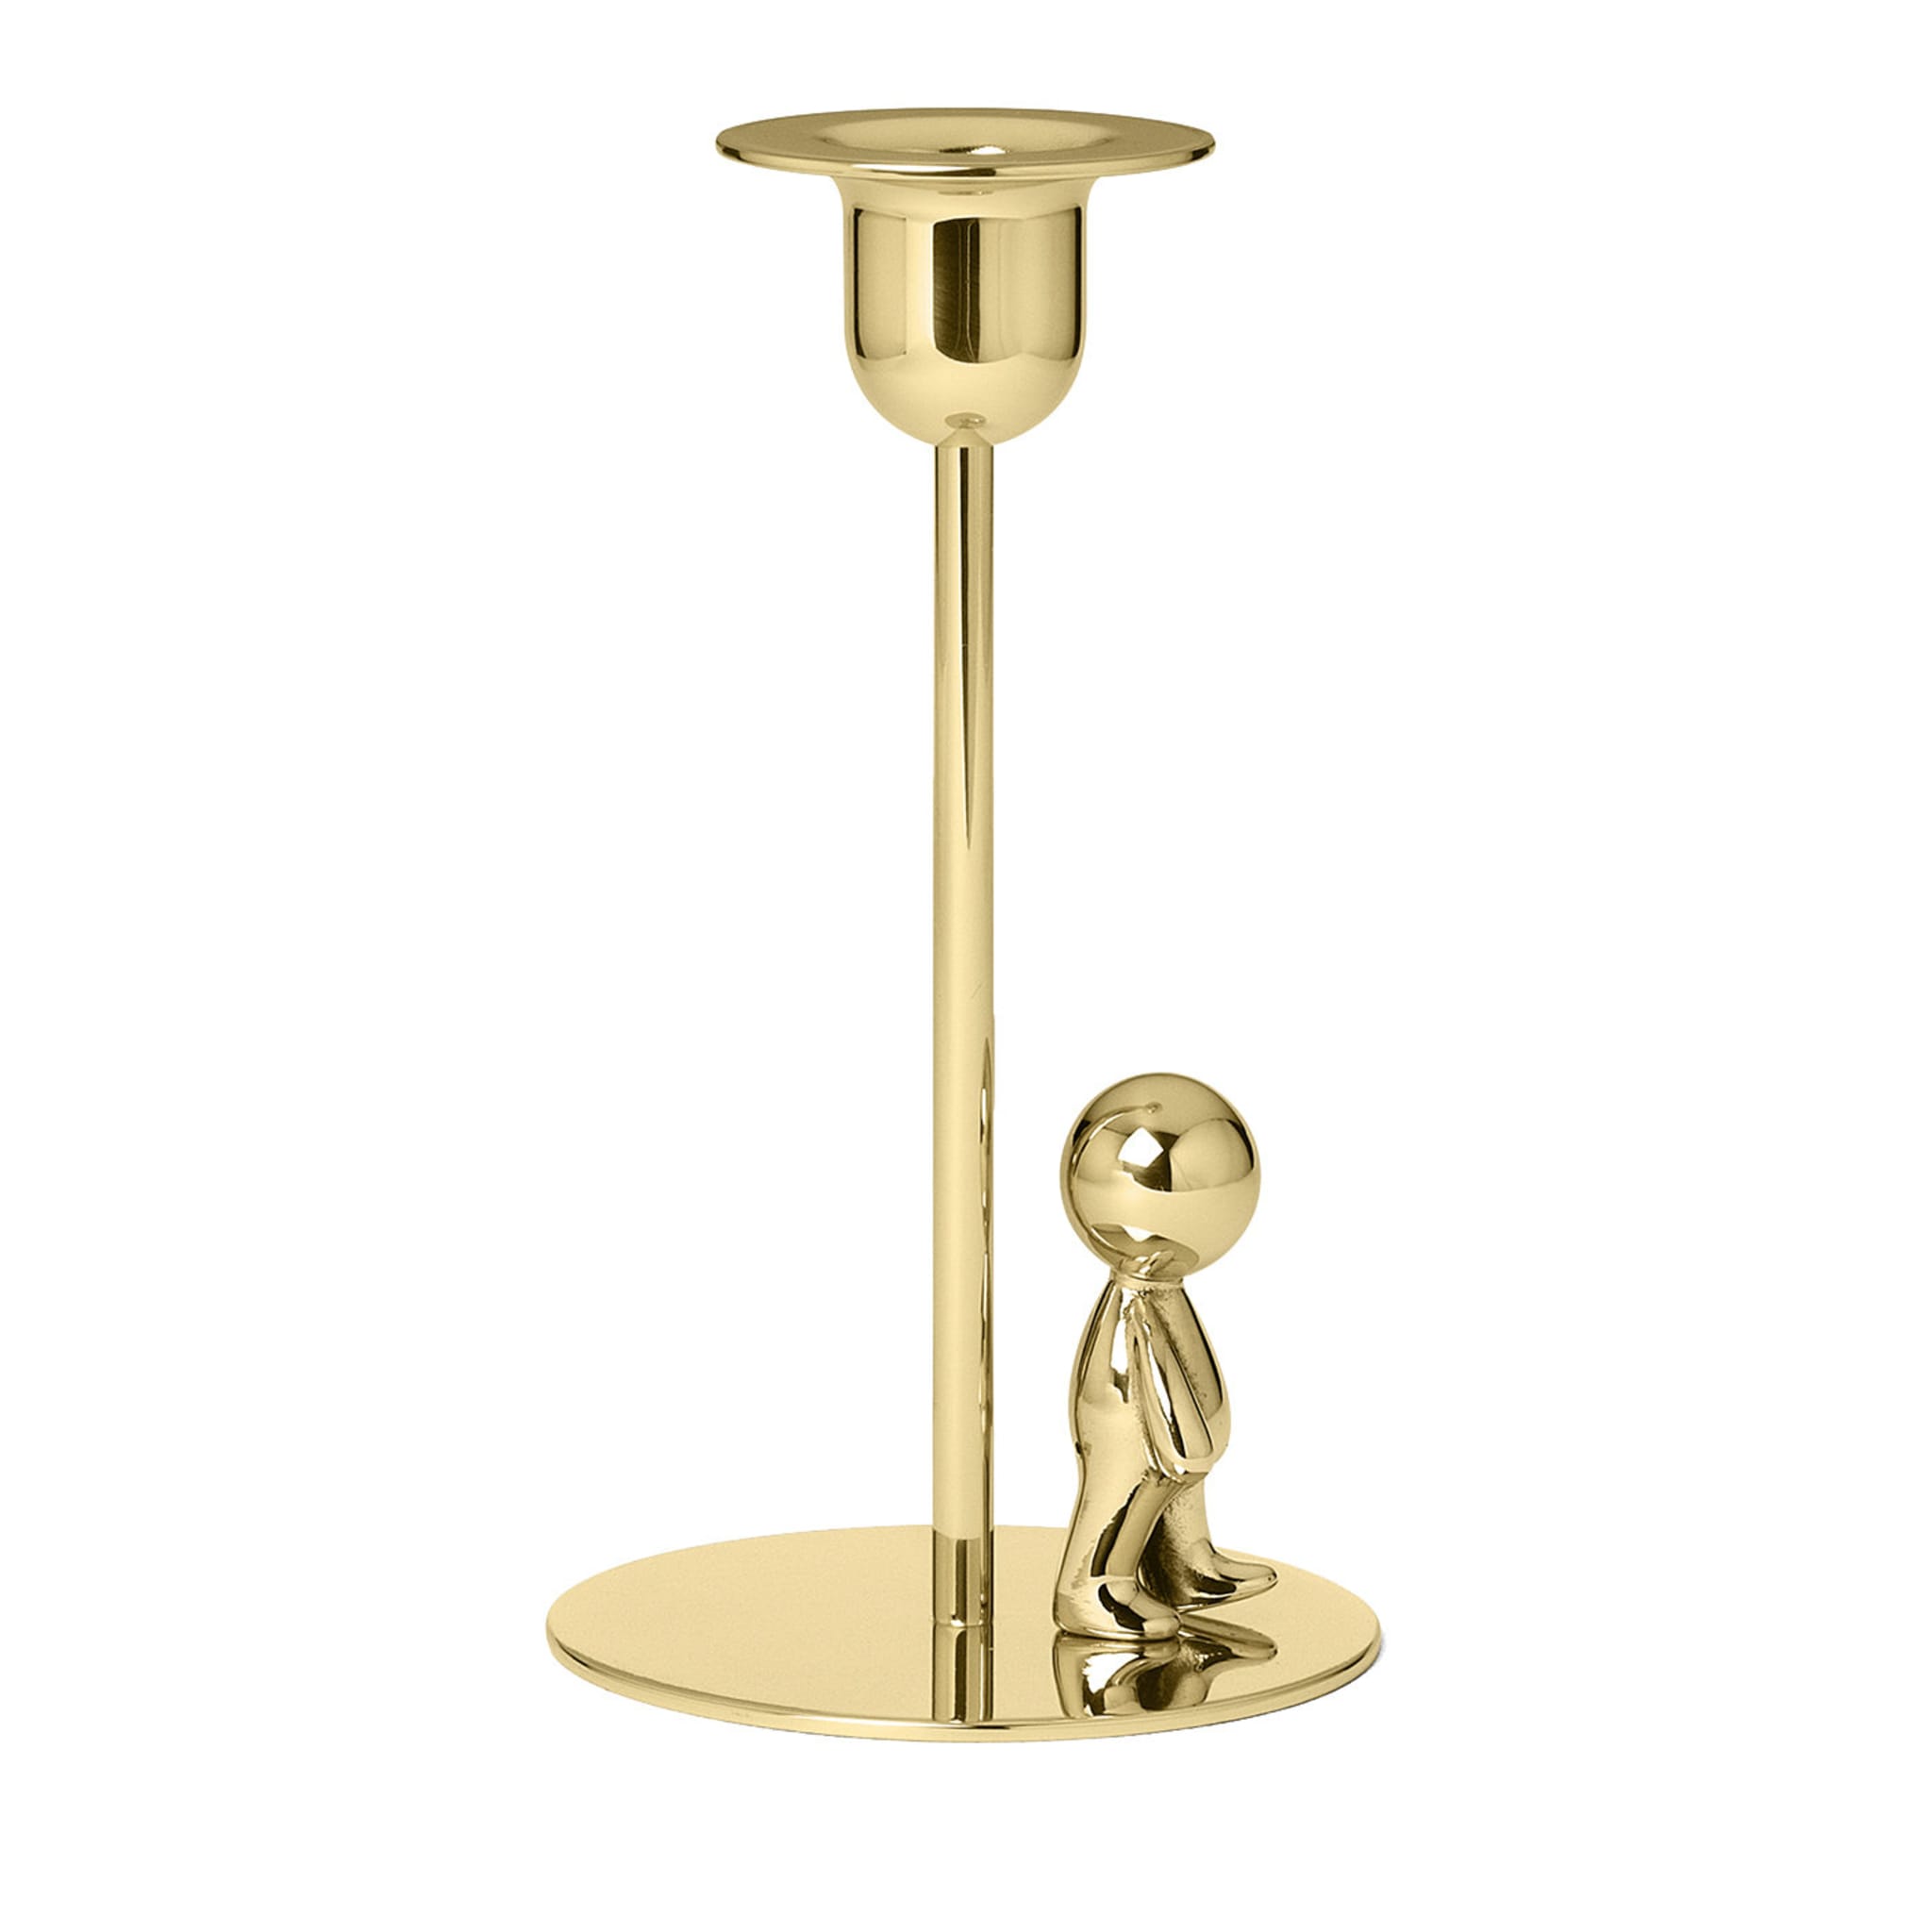 Omini Walkman Short Candlestick in Polished Brass By Stefano Giovannoni - Main view